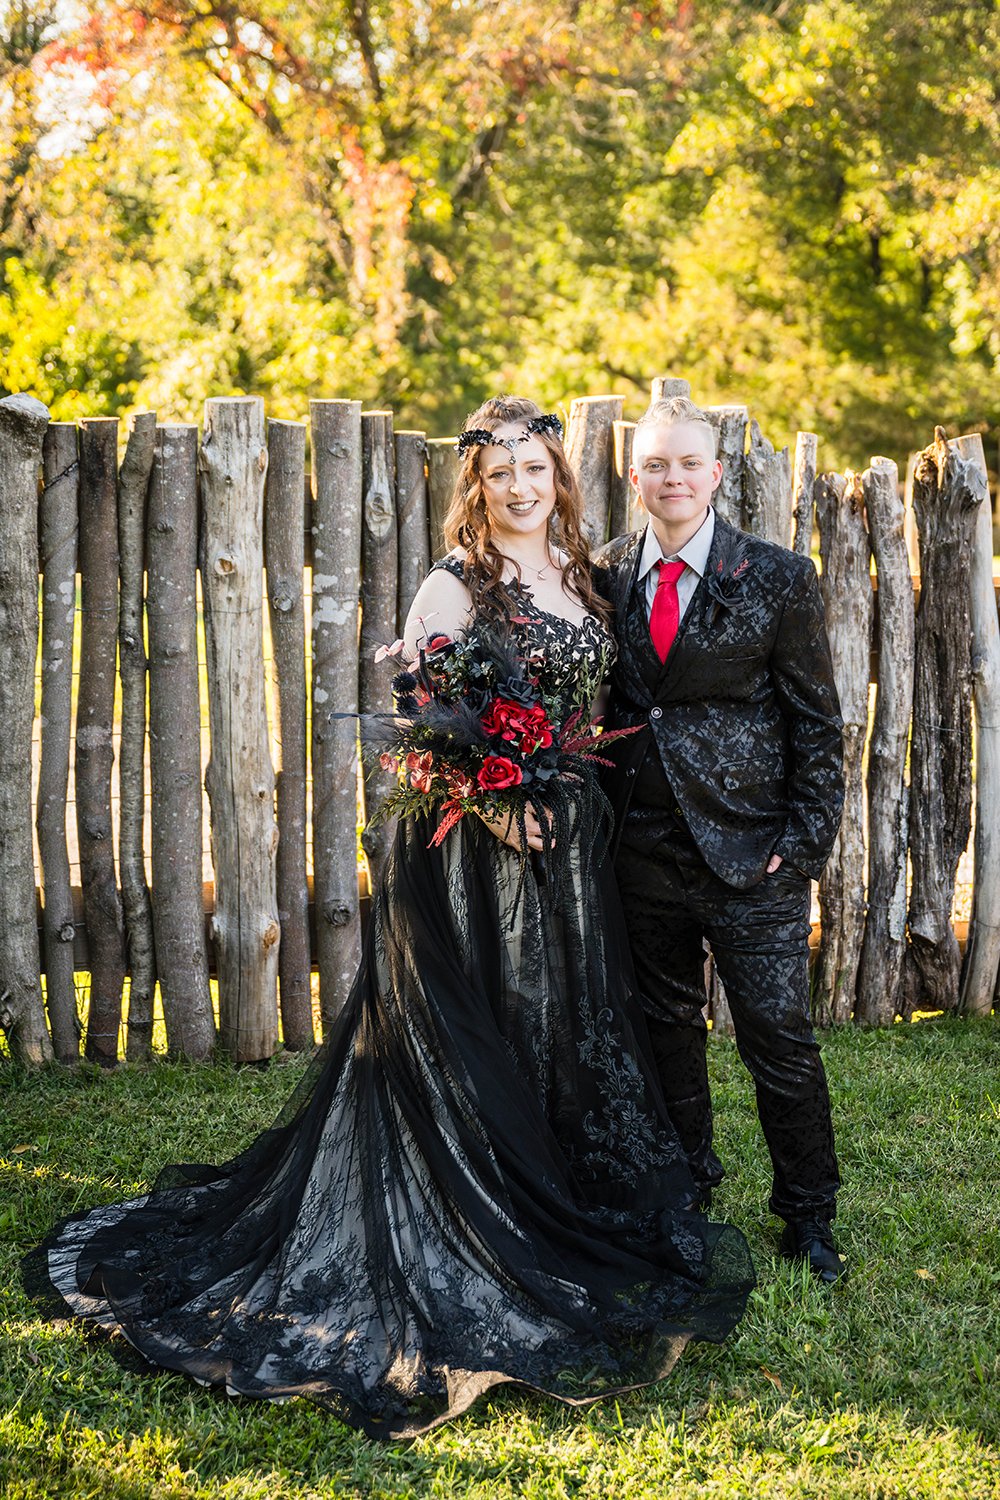 A queer couple stands together both wearing black inside the yard during their elopement for a formal portrait.